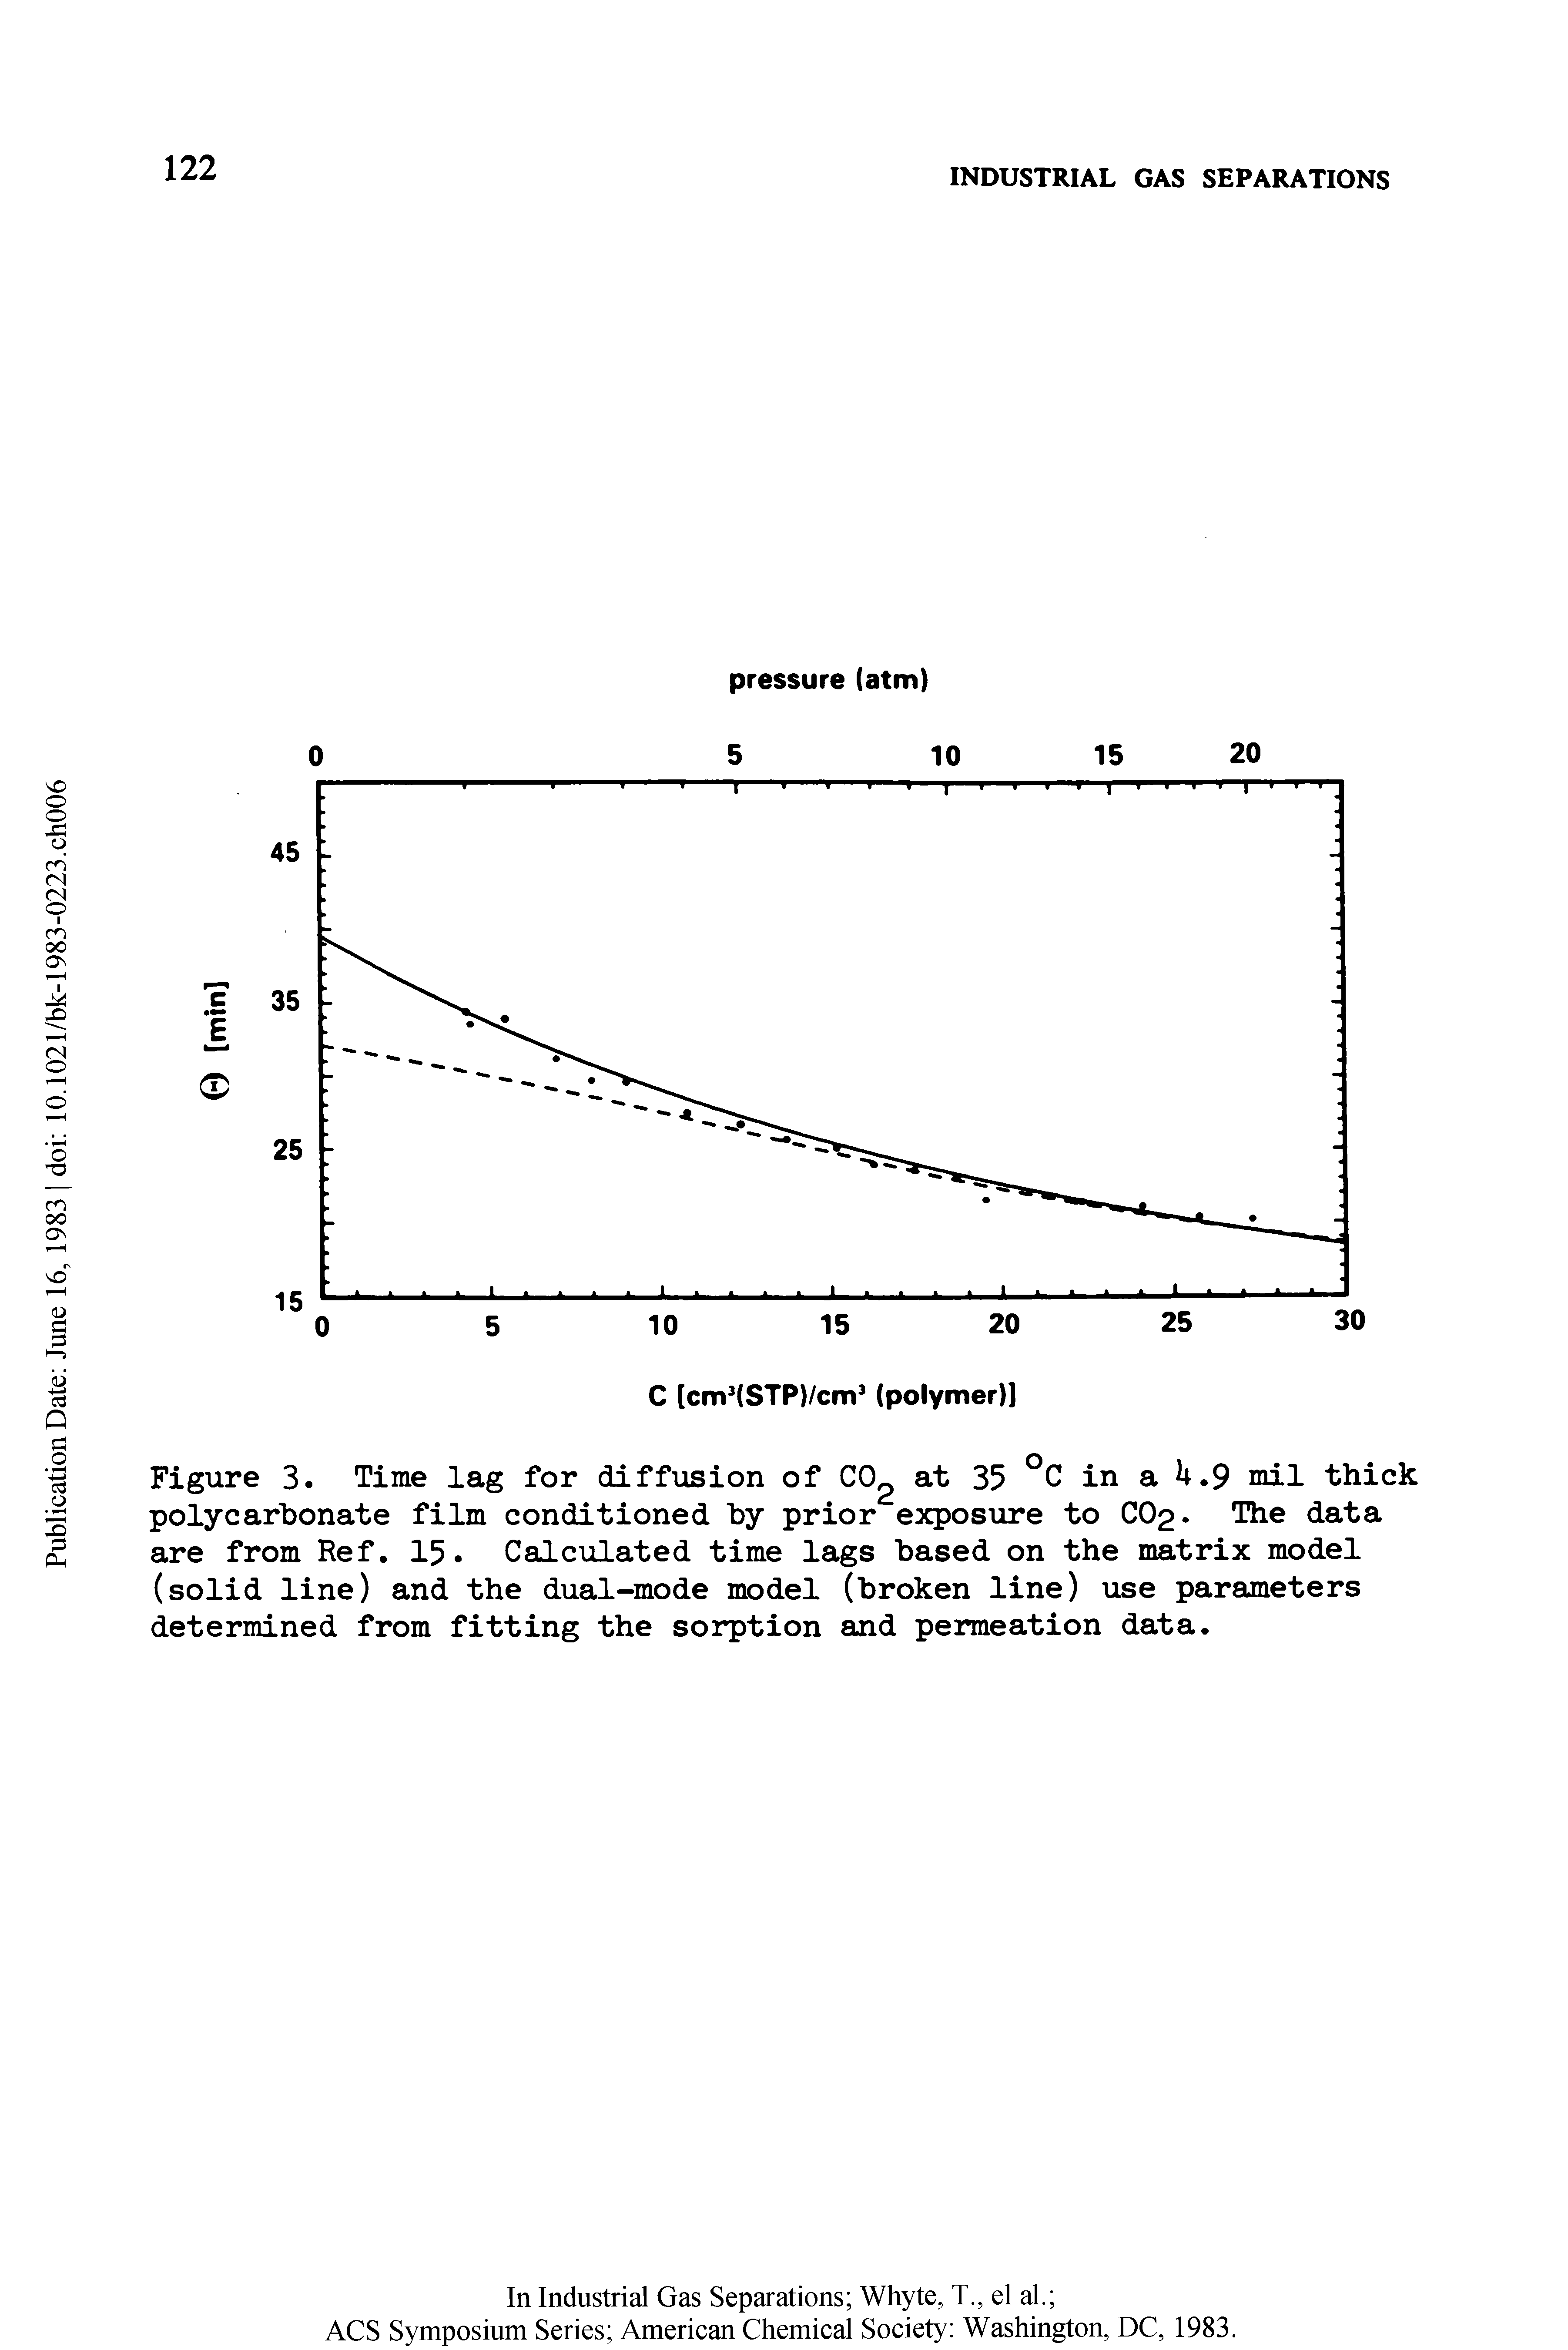 Figure 3. Time lag for diffusion of CO at 35 °C in a U.9 mil thick polycarbonate film conditioned by prior exposure to C02 The data are from Ref. 15. Calculated time lags based on the matrix model (solid line) and the dual-mode model (broken line) use parameters determined from fitting the sorption and permeation data.